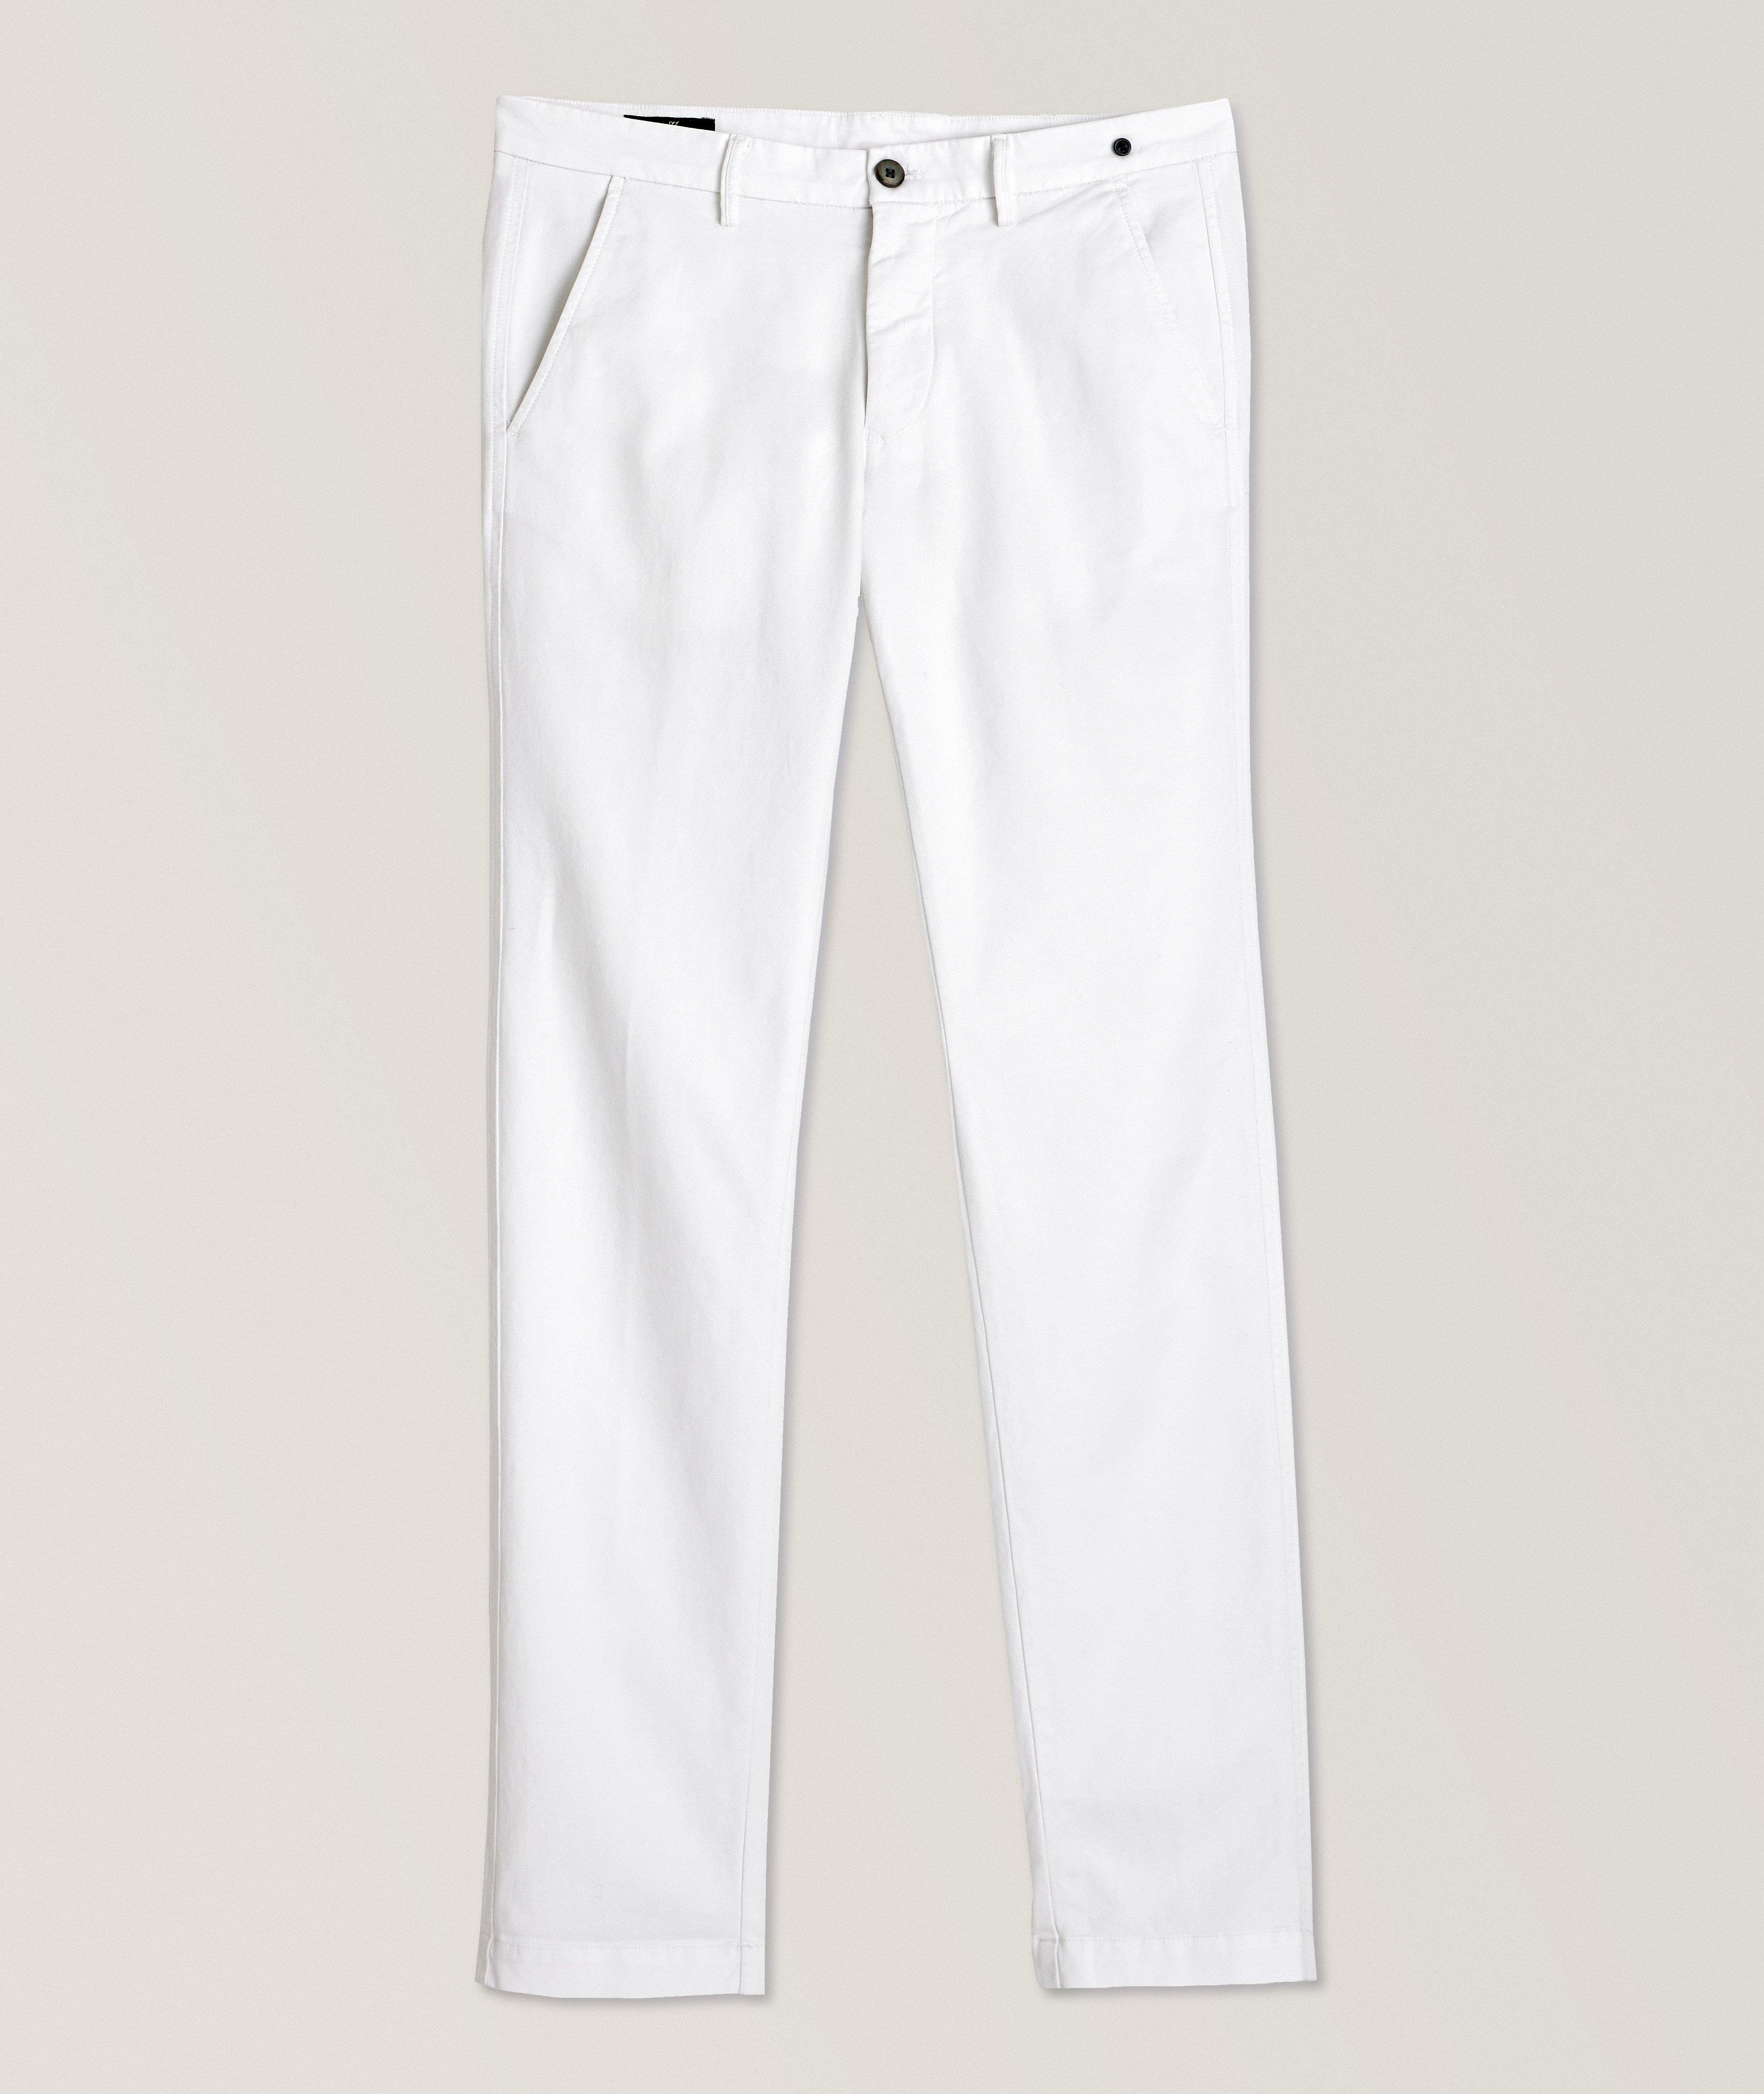 Slim-Fit Torino Pleated Jersey Stretch-Cotton Pants image 0